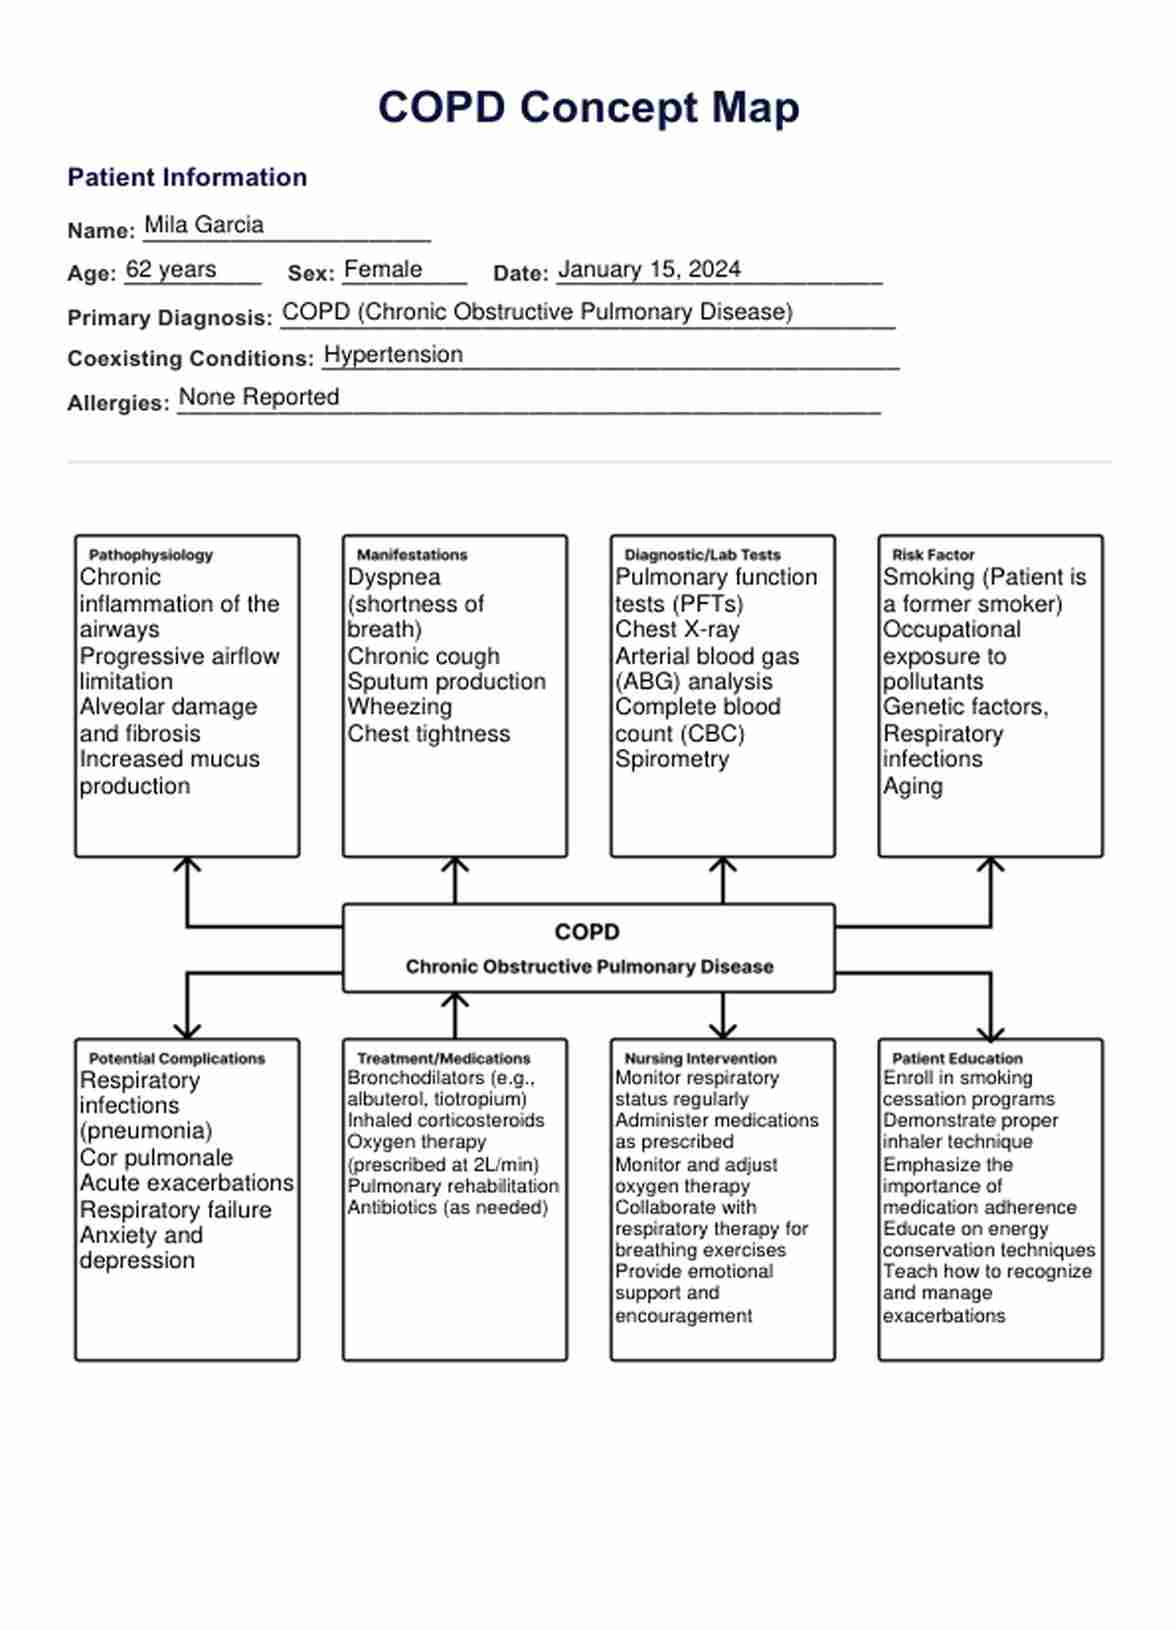 COPD Concept Map PDF Example